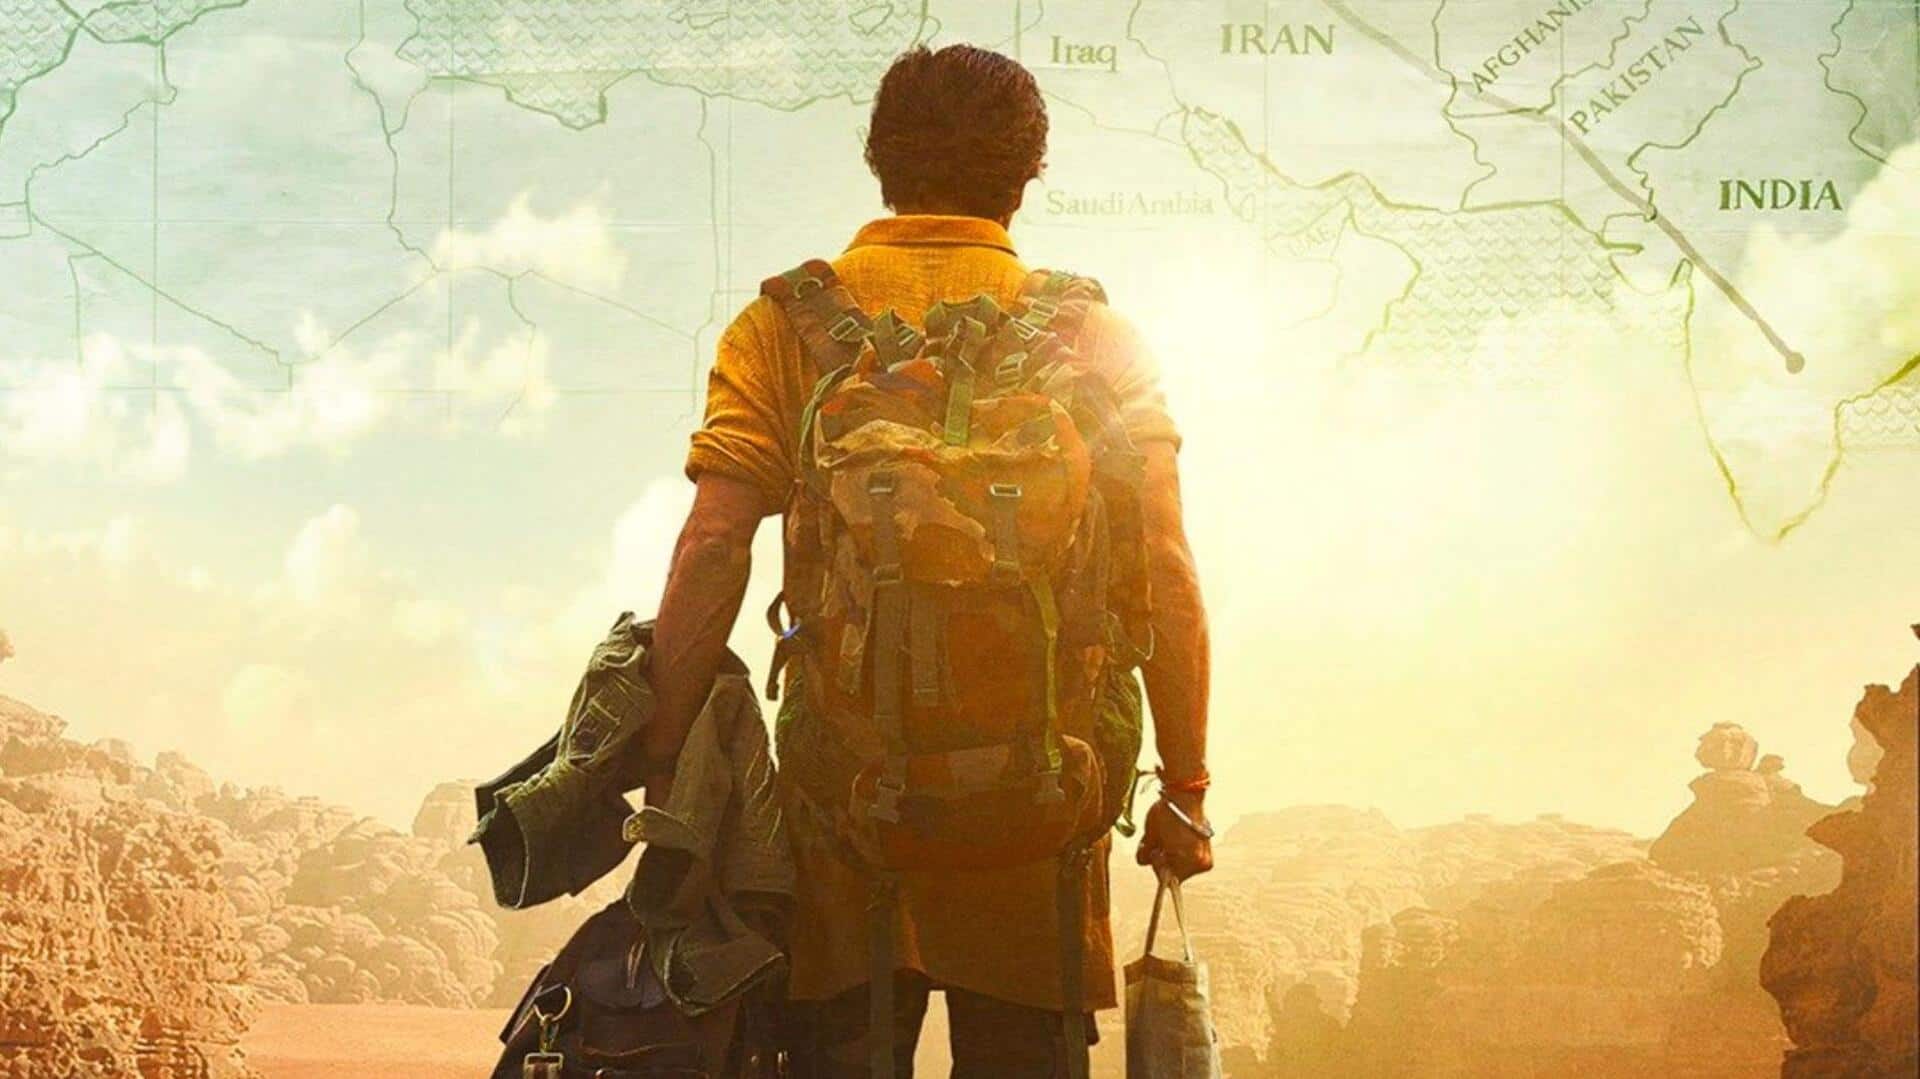 'Dunki' poster featuring Shah Rukh Khan leaks online: Details here